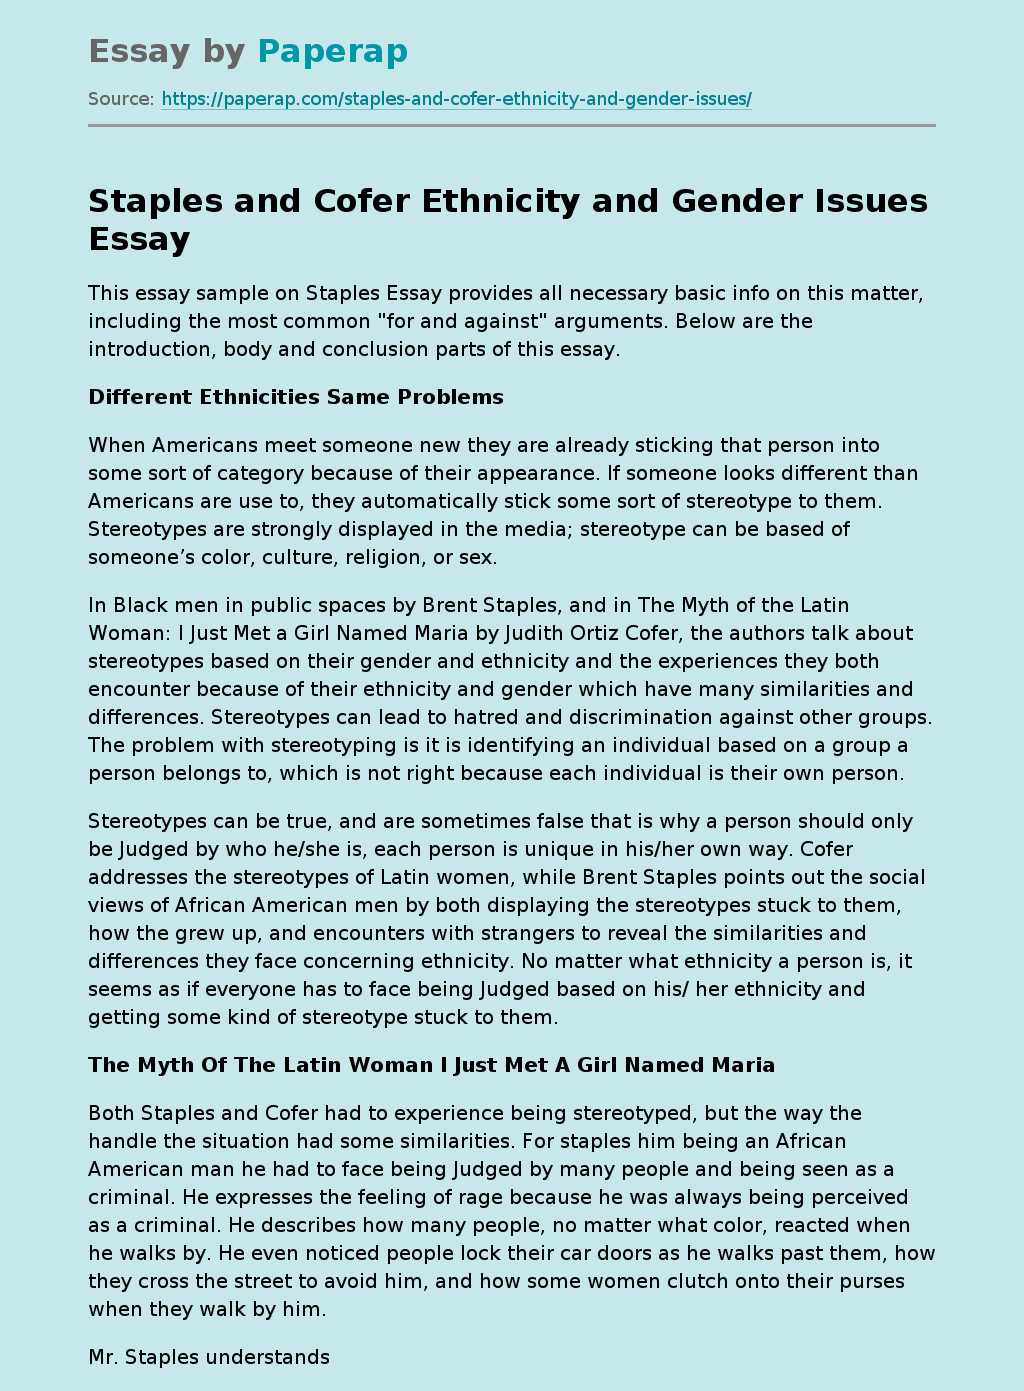 Staples and Cofer Ethnicity and Gender Issues